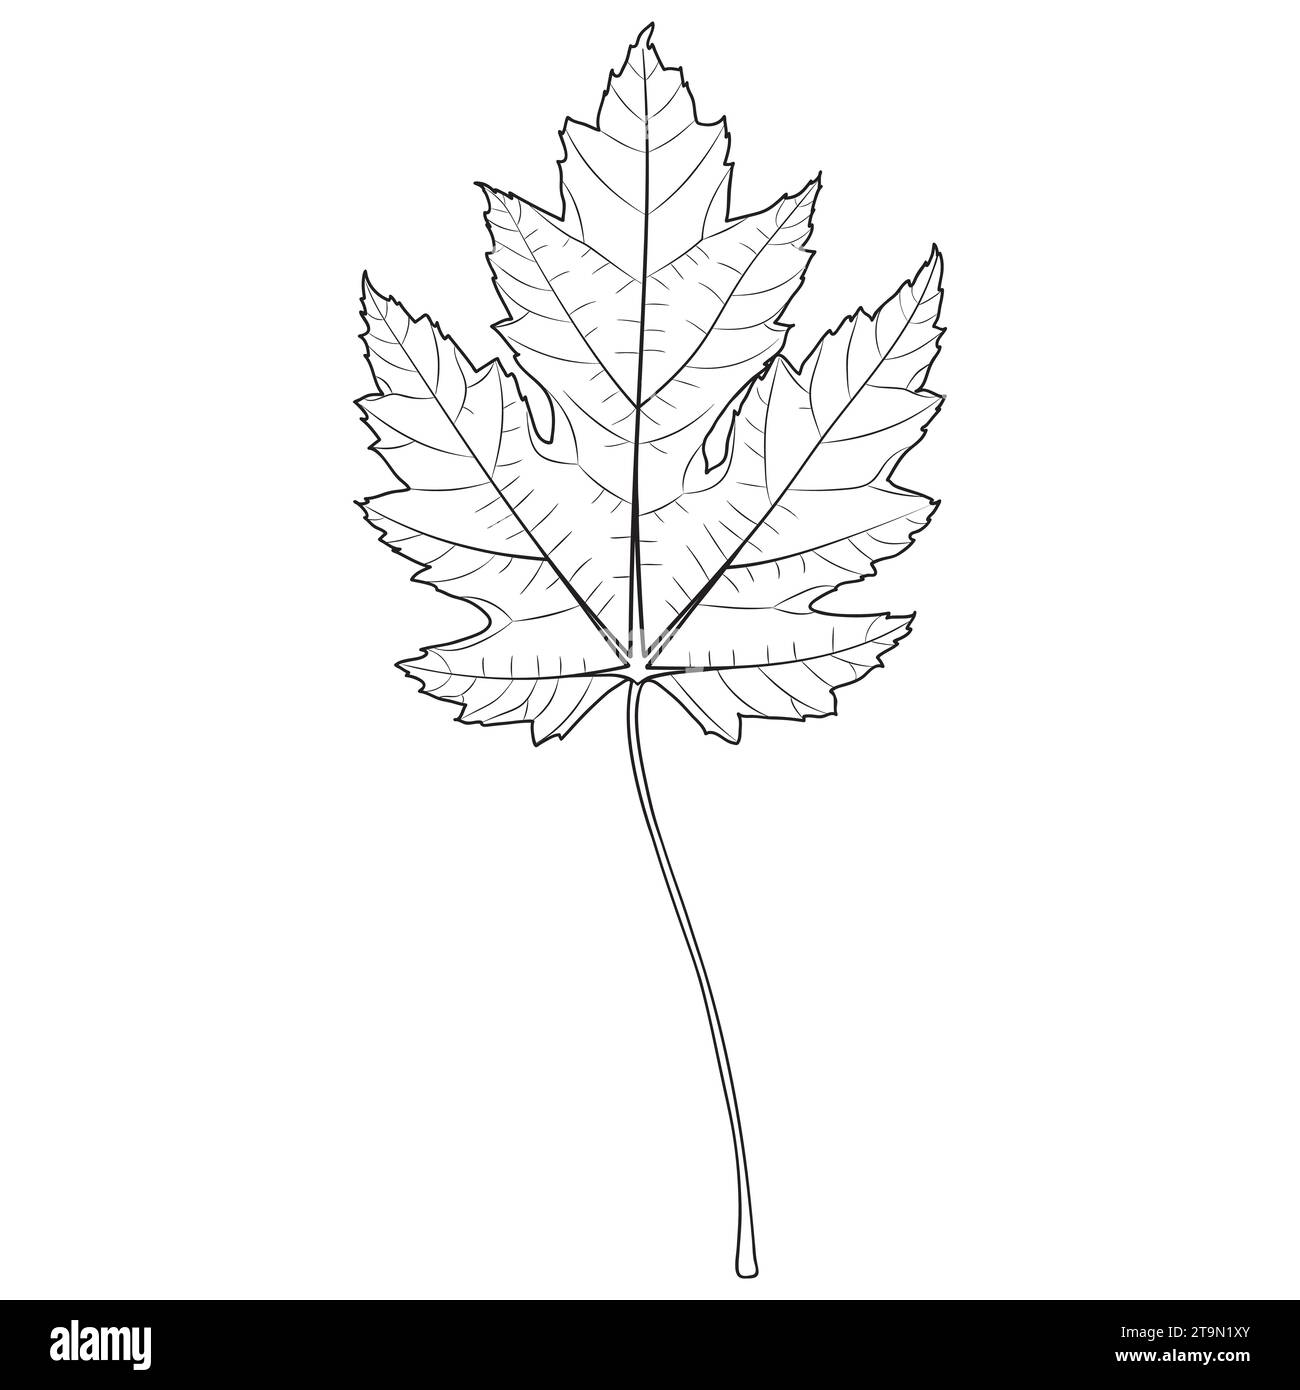 Silver maple leaf outline, vector botanical illustration. Maple tree leaf silhouette, coloring book page. Stock Vector